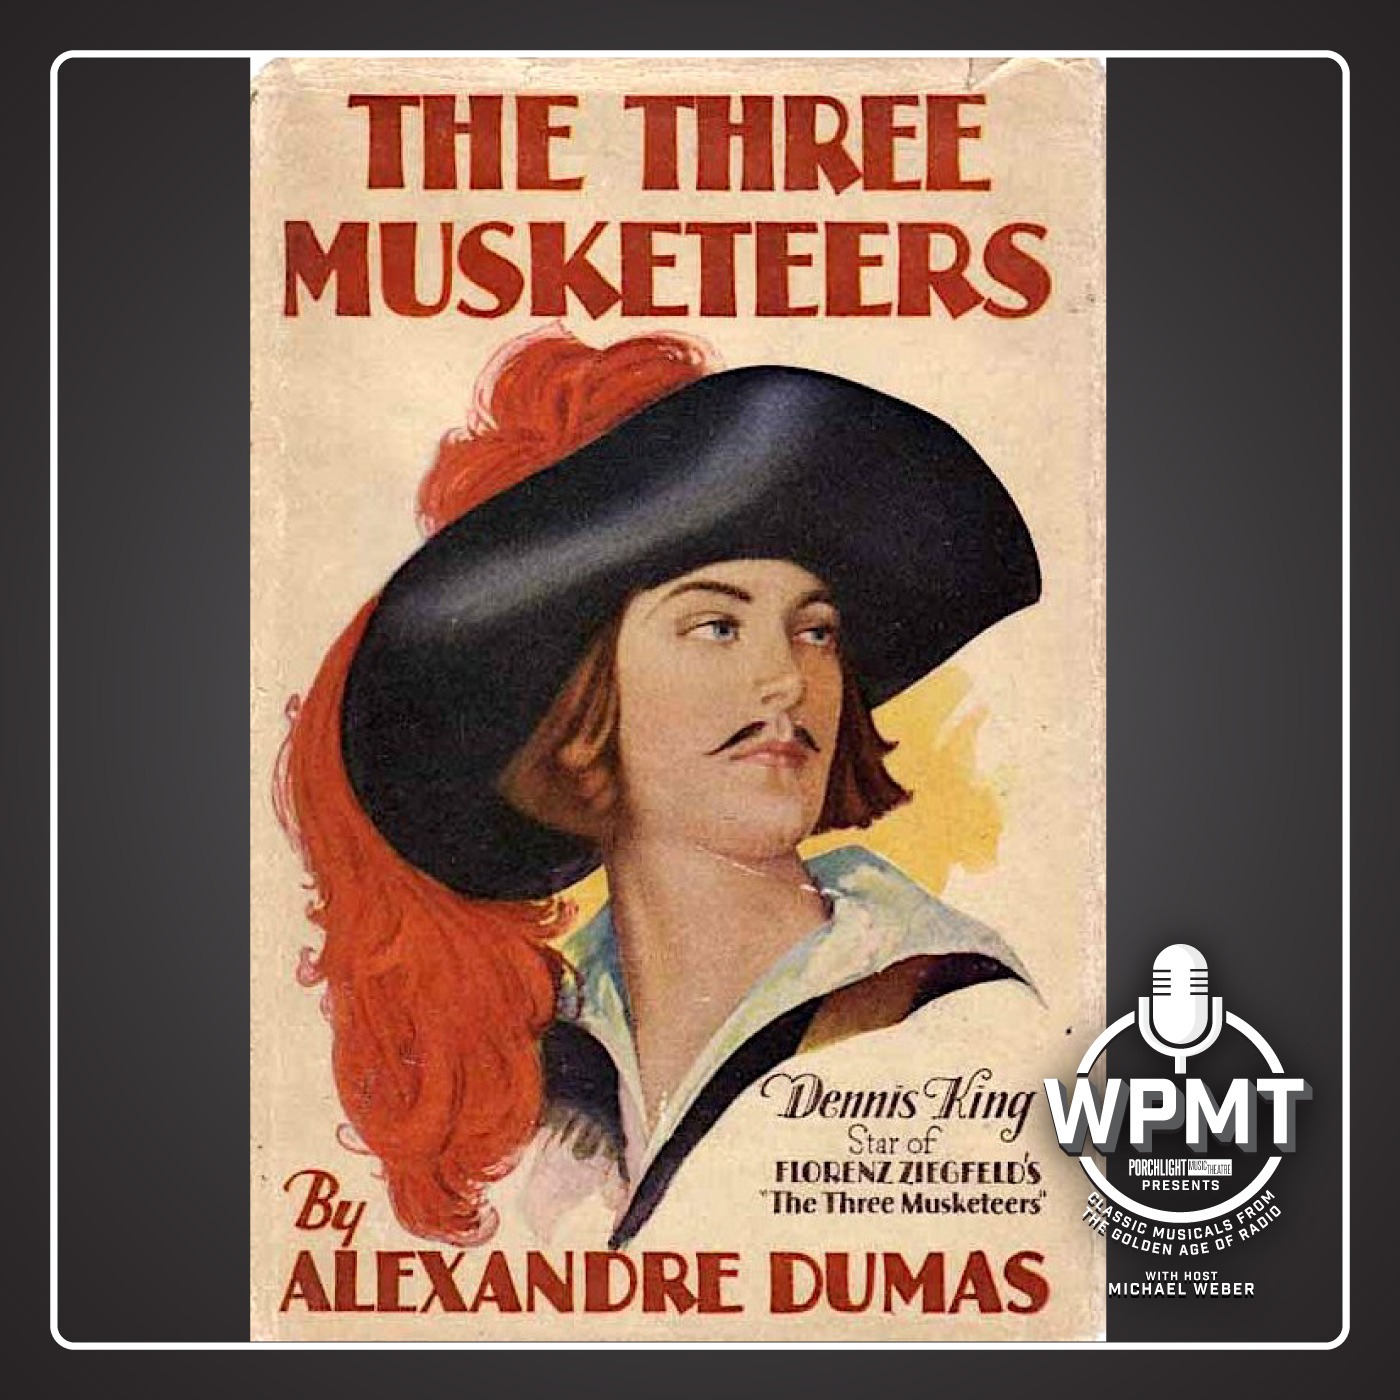 WPMT #92: The Three Musketeers